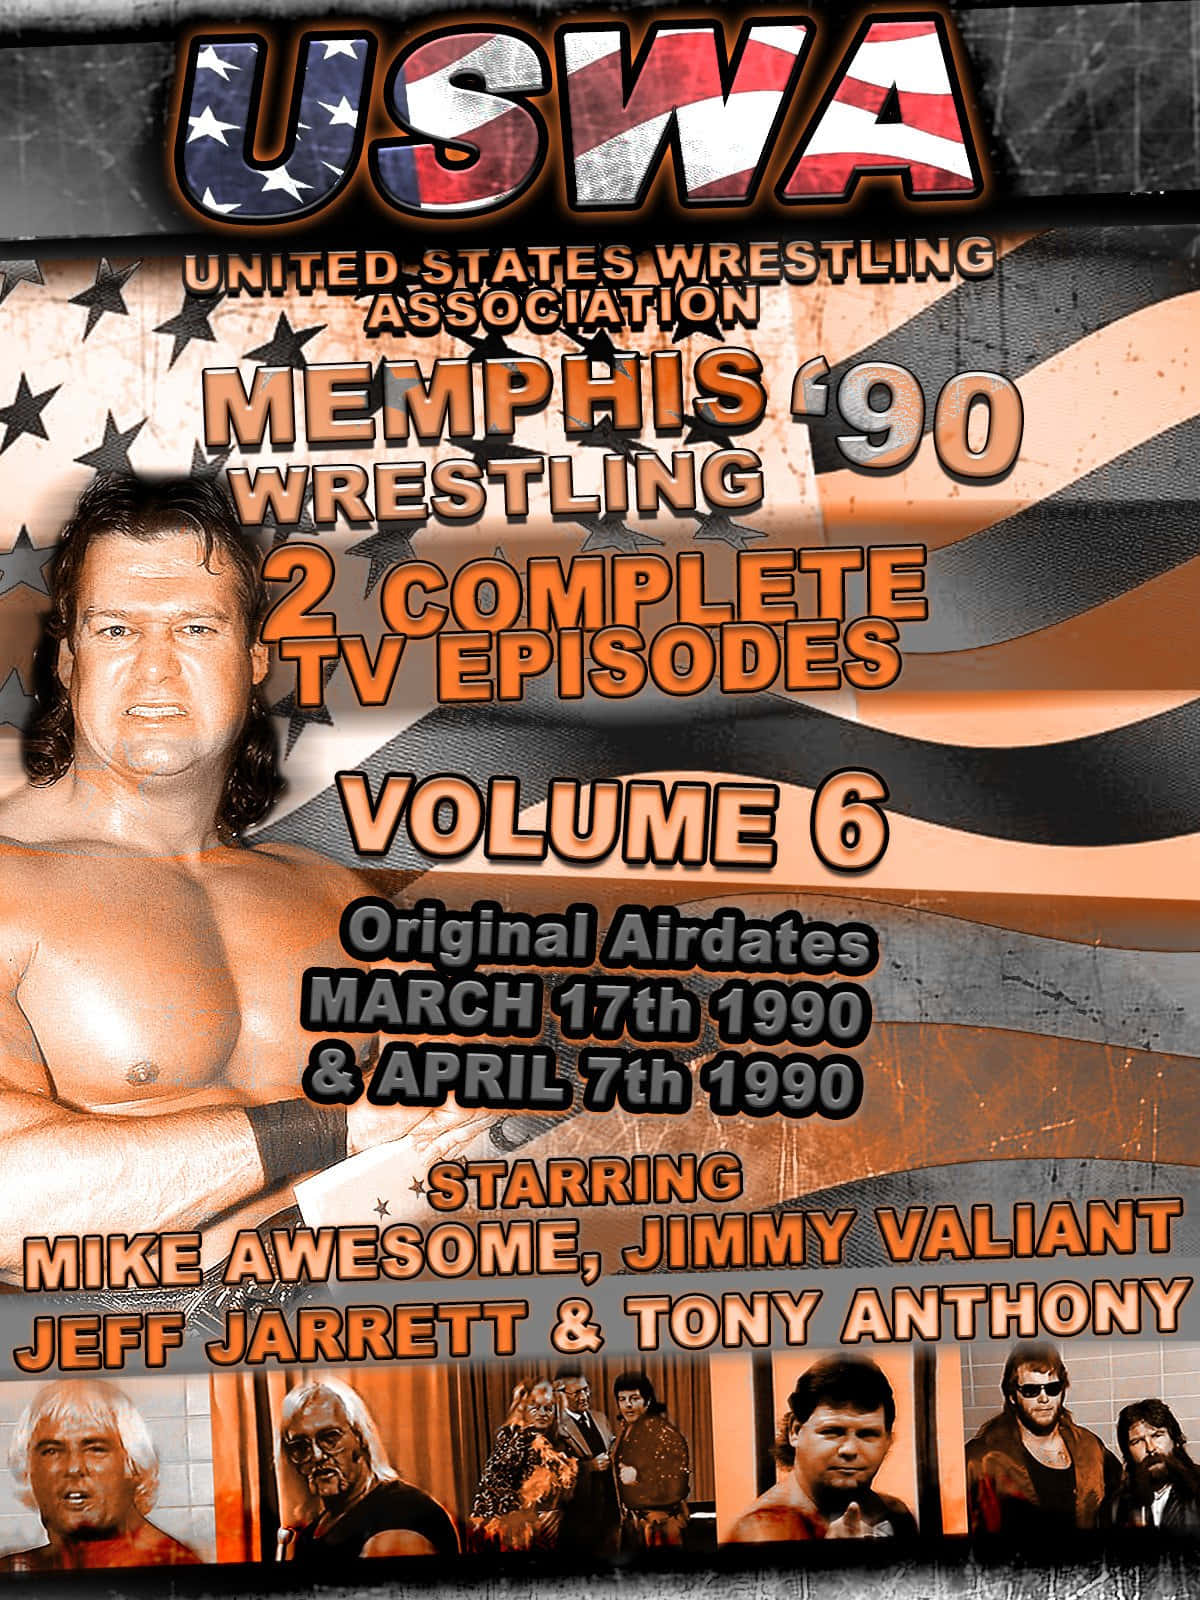 Mike Awesome 1200 X 1600 Wallpaper